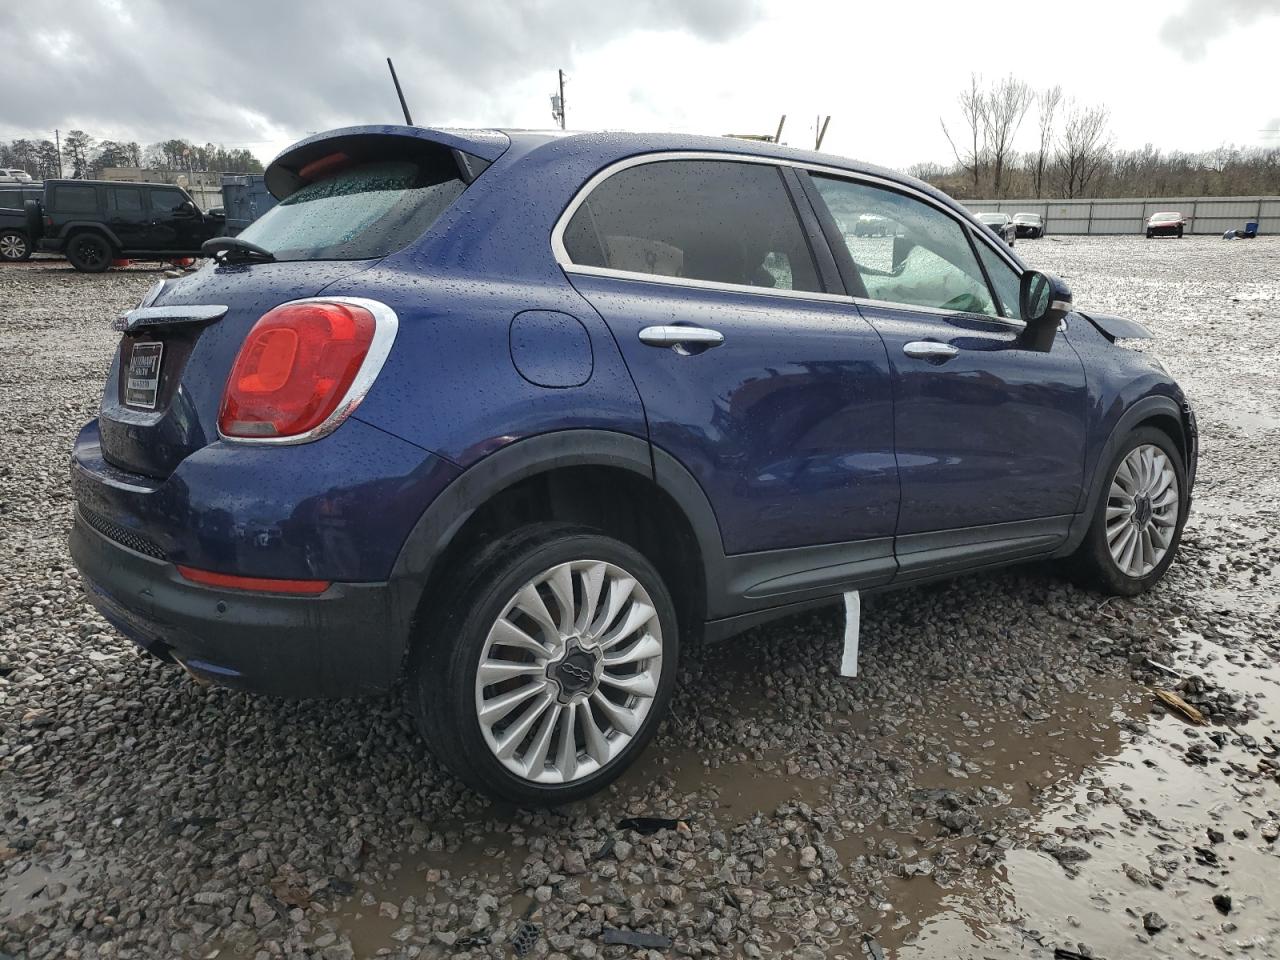 ZFBCFXDT5GP****** Salvage and Repairable 2016 Fiat 500X in AL - Hueytown